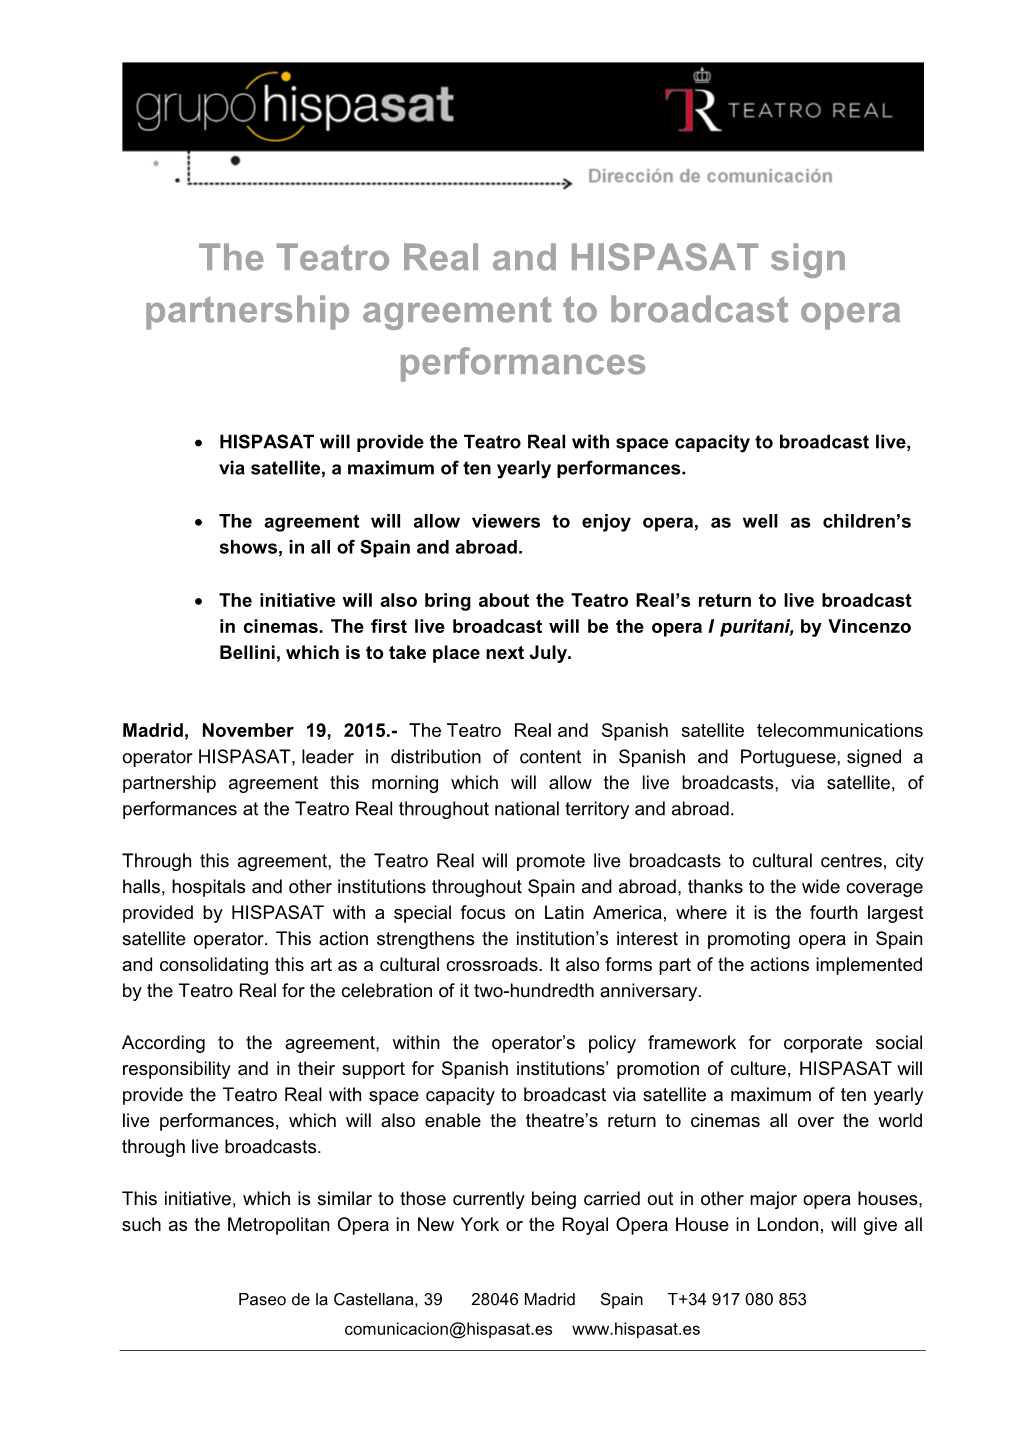 The Teatro Real and HISPASAT Sign Partnership Agreement to Broadcast Opera Performances